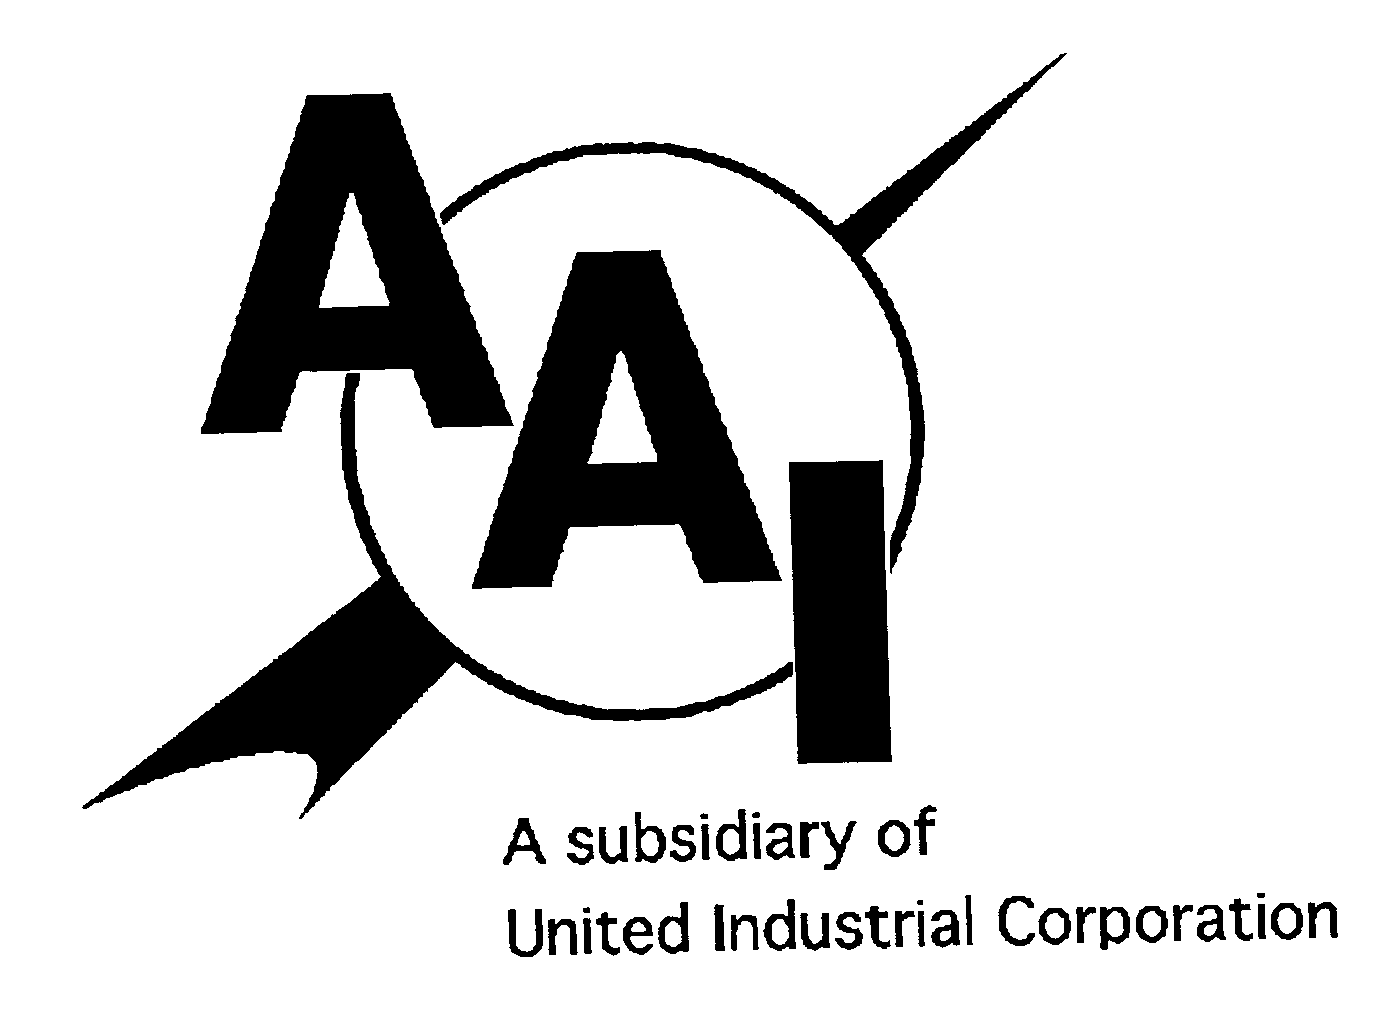  AAI A SUBSIDIARY OF UNITED INDUSTRIAL CORPORATION